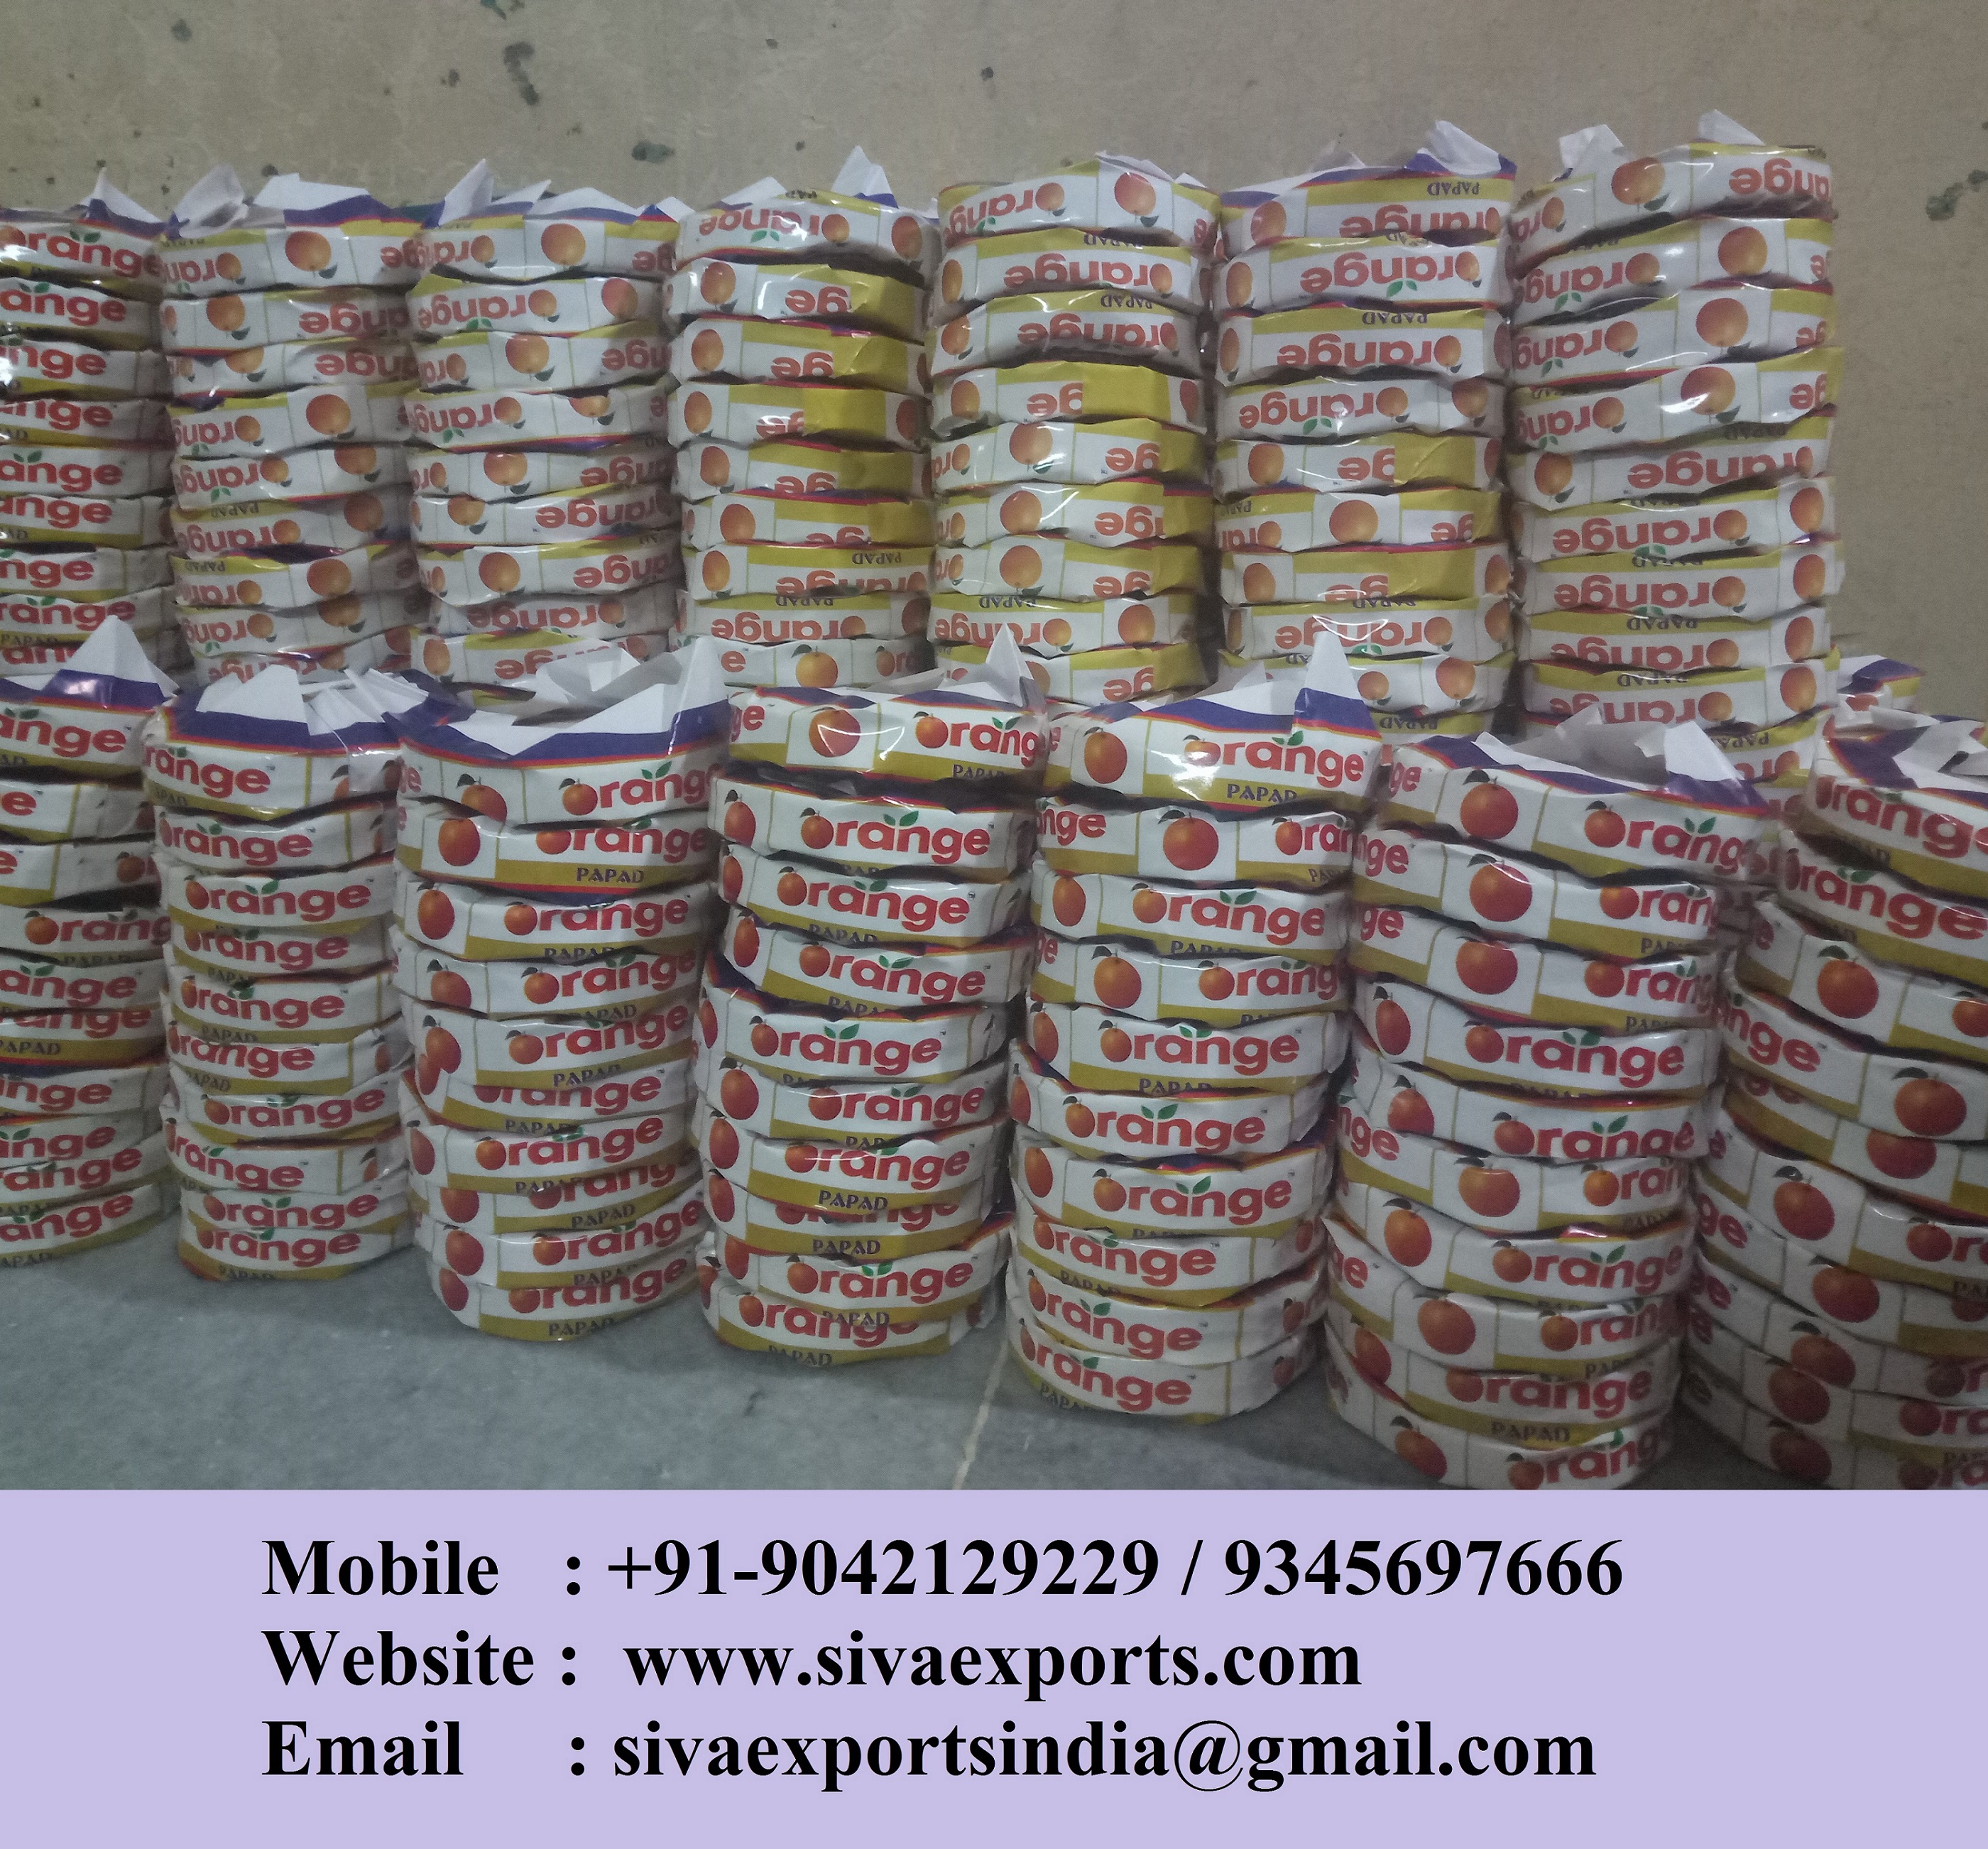 list of best papad manufacturers in India, appalam manufacturers in india, papad manufacturers in india, appalam manufacturers in tamilnadu, papad manufacturers in tamilnadu, appalam manufacturers in madurai, papad manufacturers in madurai, appalam exporters in india, papad exporters in india, appalam exporters in tamilnadu, papad exporters in tamilnadu, appalam exporters in madurai, papad exporters in madurai, appalam wholesalers in india, papad wholesalers in india, appalam wholesalers in tamilnadu, papad wholesalers in tamilnadu, appalam wholesalers in madurai, papad wholesalers in madurai, appalam distributors in india, papad distributors in india, appalam distributors in tamilnadu, papad distributors in tamilnadu, appalam distributors in madurai, papad distributors in madurai, appalam suppliers in india, papad suppliers in india, appalam suppliers in tamilnadu, papad suppliers in tamilnadu, appalam suppliers in madurai, papad suppliers in madurai, appalam dealers in india, papad dealers in india, appalam dealers in tamilnadu, papad dealers in tamilnadu, appalam dealers in madurai, papad dealers in madurai, appalam companies in india, appalam companies in tamilnadu, appalam companies in madurai, papad companies in india, papad companies in tamilnadu, papad companies in madurai, appalam company in india, appalam company in tamilnadu, appalam company in madurai, papad company in india, papad company in tamilnadu, papad company in madurai, appalam factory in india, appalam factory in tamilnadu, appalam factory in madurai, papad factory in india, papad factory in tamilnadu, papad factory in madurai, appalam factories in india, appalam factories in tamilnadu, appalam factories in madurai, papad factories in india, papad factories in tamilnadu, papad factories in madurai, appalam production units in india, appalam production units in tamilnadu, appalam production units in madurai, papad production units in india, papad production units in tamilnadu, papad production units in madurai, pappadam manufacturers in india, poppadom manufacturers in india, pappadam manufacturers in tamilnadu, poppadom manufacturers in tamilnadu, pappadam manufacturers in madurai, poppadom manufacturers in madurai, appalam manufacturers, papad manufacturers, pappadam manufacturers, pappadum exporters in india, pappadam exporters in india, poppadom exporters in india, pappadam exporters in tamilnadu, pappadum exporters in tamilnadu, poppadom exporters in tamilnadu, pappadum exporters in madurai, pappadam exporters in madurai, poppadom exporters in Madurai, pappadum wholesalers in madurai, pappadam wholesalers in madurai, poppadom wholesalers in Madurai, pappadum wholesalers in tamilnadu, pappadam wholesalers in tamilnadu, poppadom wholesalers in Tamilnadu, pappadam wholesalers in india, poppadom wholesalers in india, pappadum wholesalers in india, appalam retailers in india, papad retailers in india, appalam retailers in tamilnadu, papad retailers in tamilnadu, appalam retailers in madurai, papad retailers in madurai, appalam, papad, Siva Exports, Orange Appalam, Orange Papad, Lion Brand Appalam, Siva Appalam, Lion brand Papad, Sivan Appalam, Orange Pappadam, appalam, papad, papadum, papadam, papadom, pappad, pappadum, pappadam, pappadom, poppadom, popadom, poppadam, popadam, poppadum, popadum, appalam manufacturers, papad manufacturers, papadum manufacturers, papadam manufacturers, pappadam manufacturers, pappad manufacturers, pappadum manufacturers, pappadom manufacturers, poppadom manufacturers, papadom manufacturers, popadom manufacturers, poppadum manufacturers, popadum manufacturers, popadam manufacturers, poppadam manufacturers, cumin appalam, red chilli appalam, green chilli appalam, pepper appalam, garmic appalam, calcium appalam, plain appalam manufacturers in india,tamilnadu,madurai, list of papad manufacturers in india